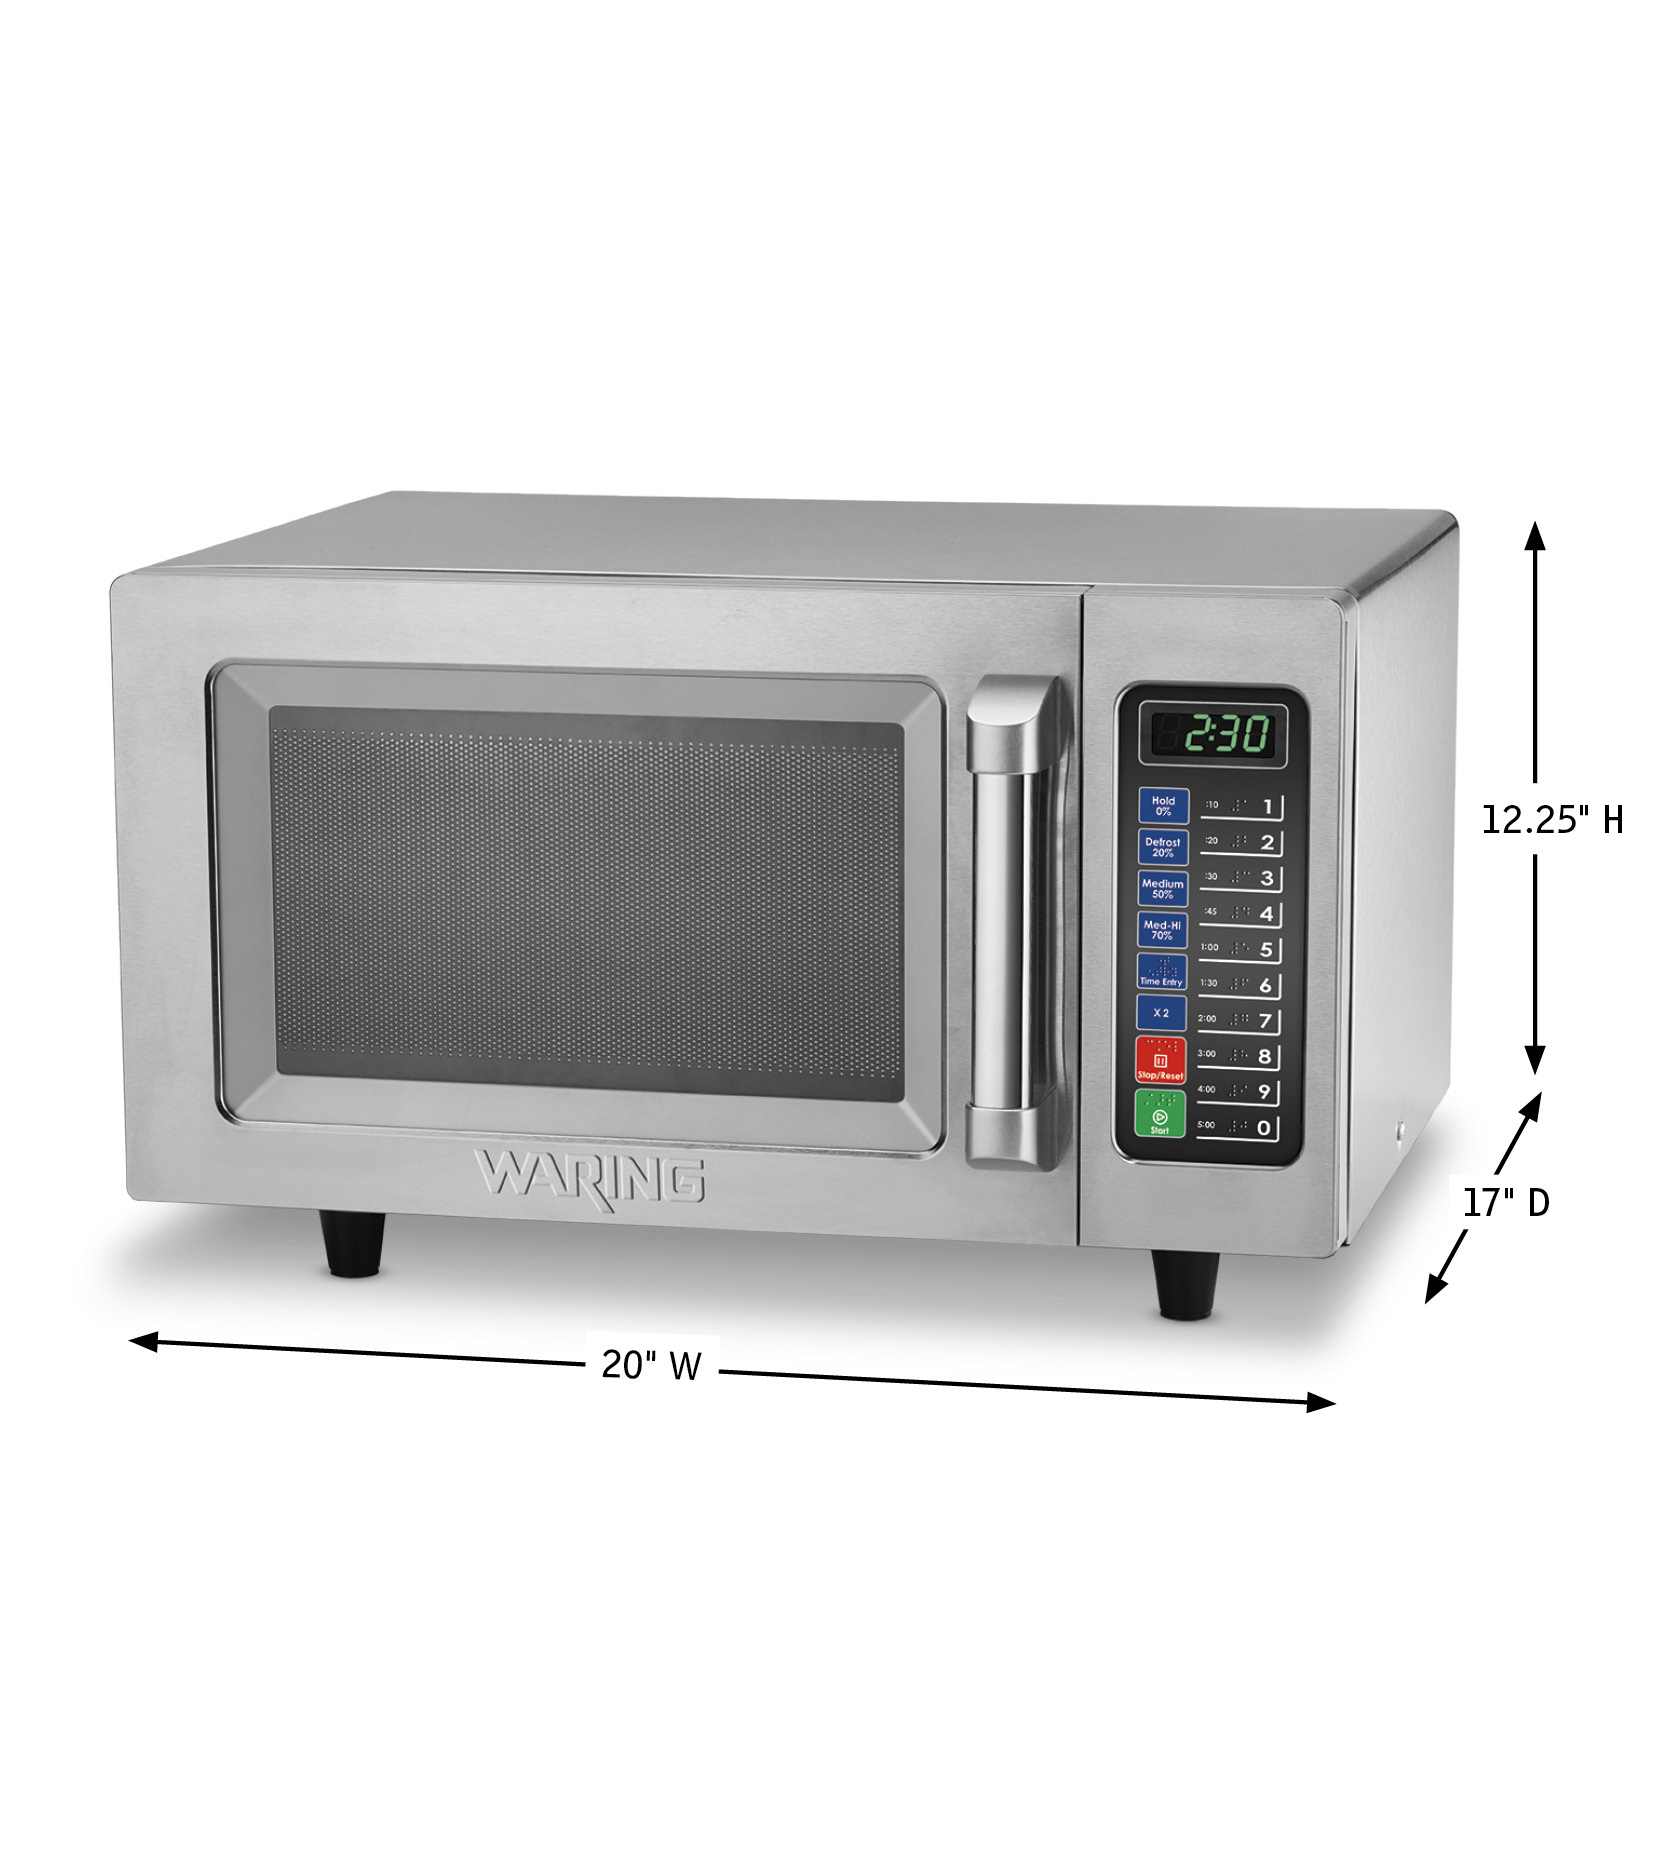 https://www.waringcommercialproducts.com/files/products/wmo90-waring-microwave-spec.jpg